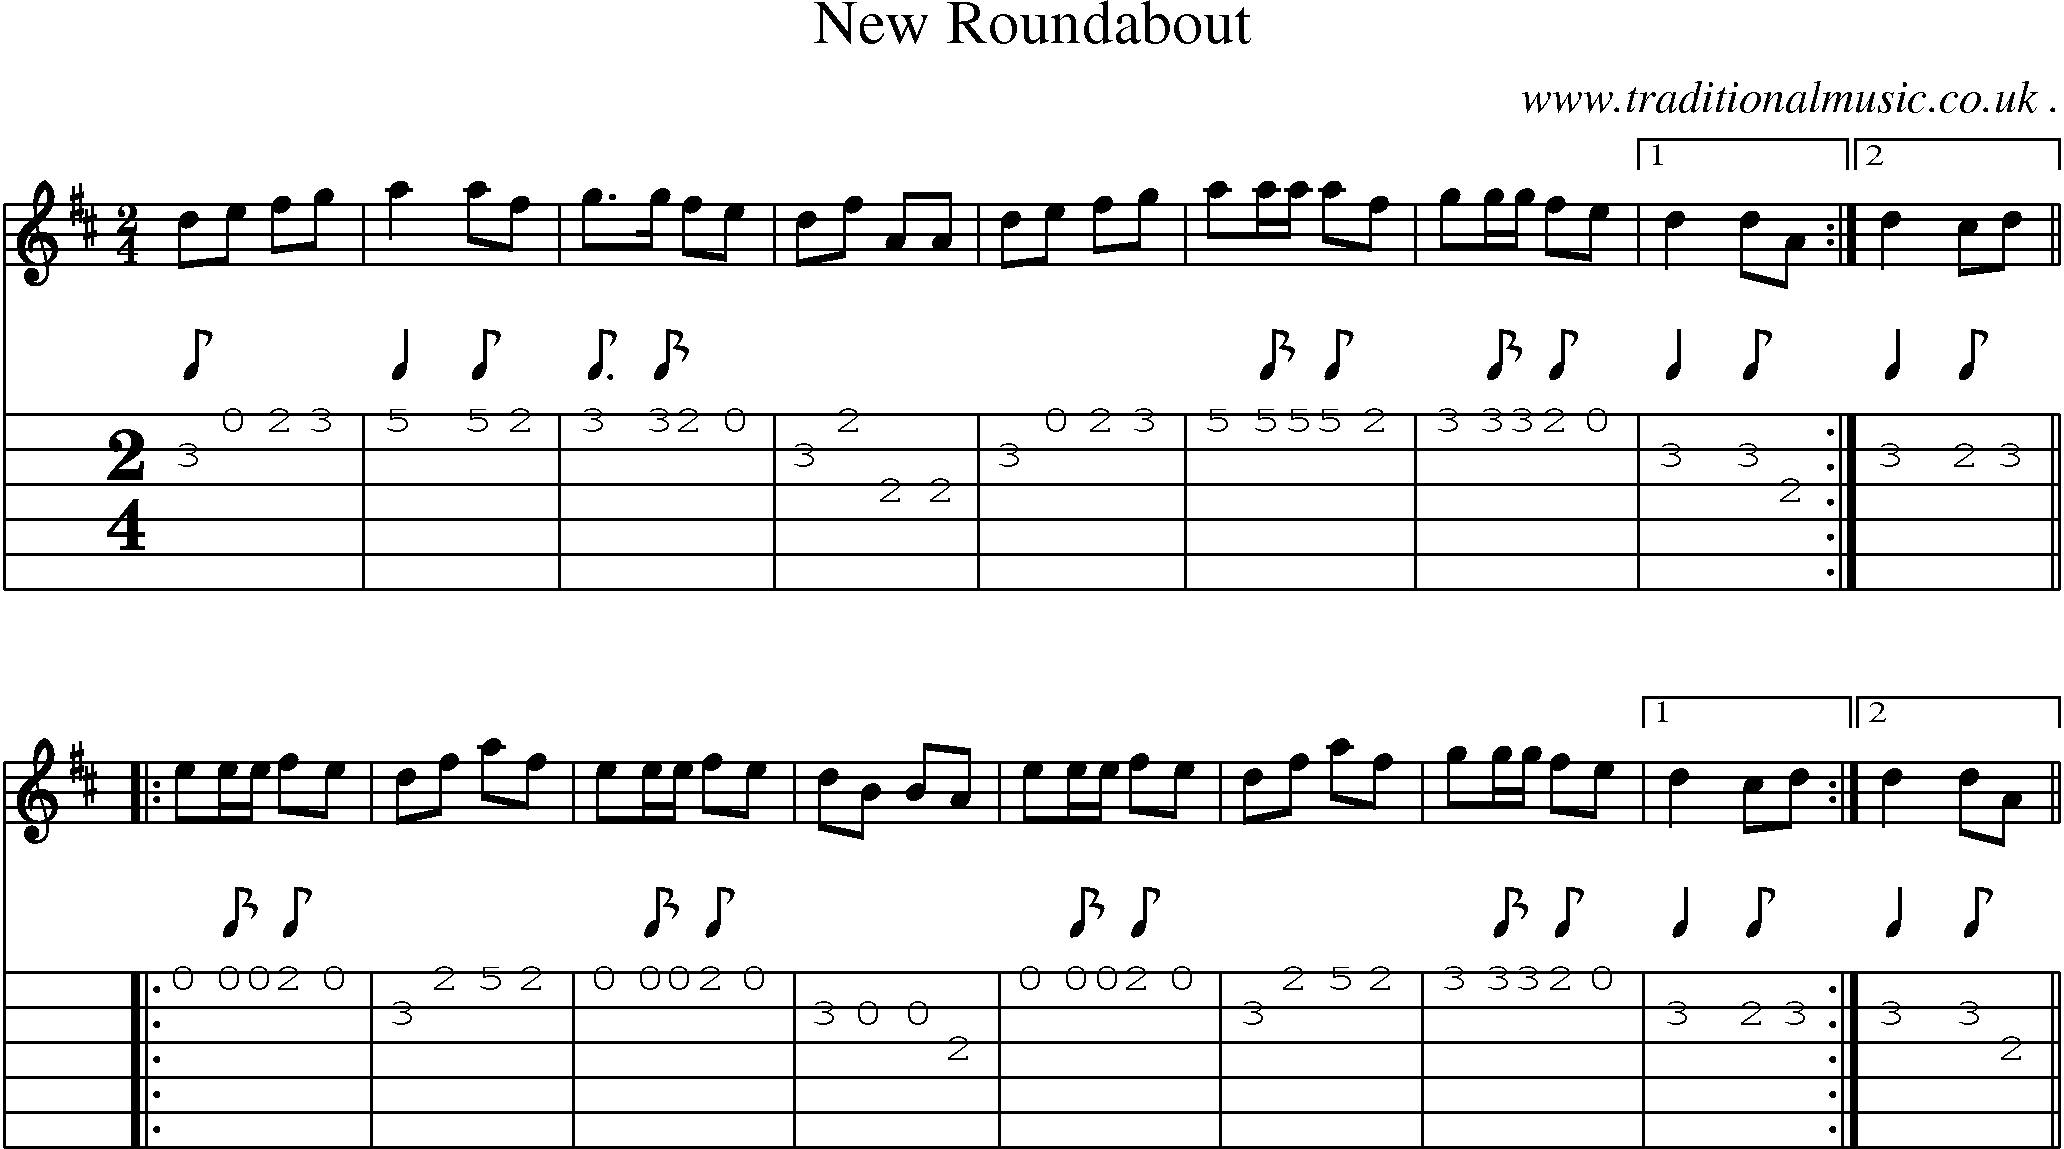 Sheet-Music and Guitar Tabs for New Roundabout